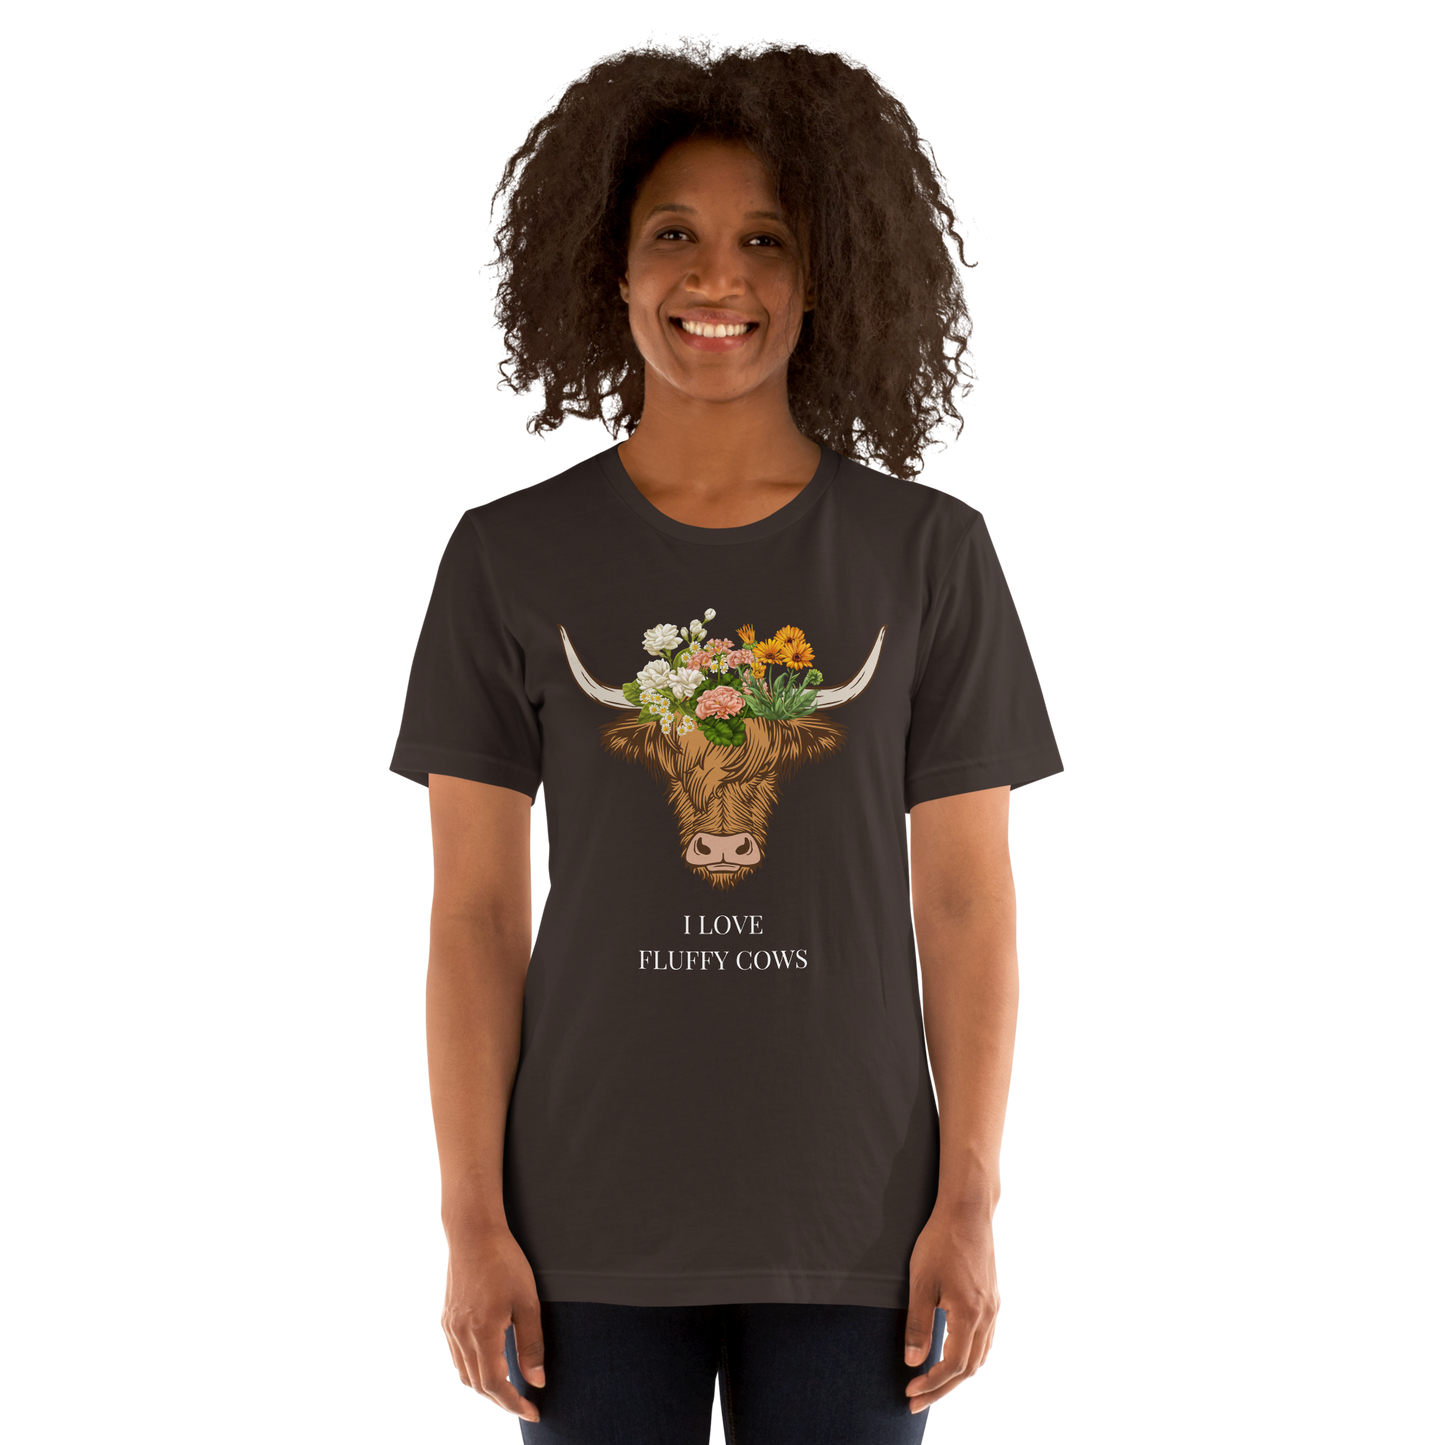 Smiling woman wearing a Brown Premium Highland Cow Tee featuring an adorable I Love Fluffy Cows graphic on the chest - Cute Graphic Highland Cow Tees - Boozy Fox